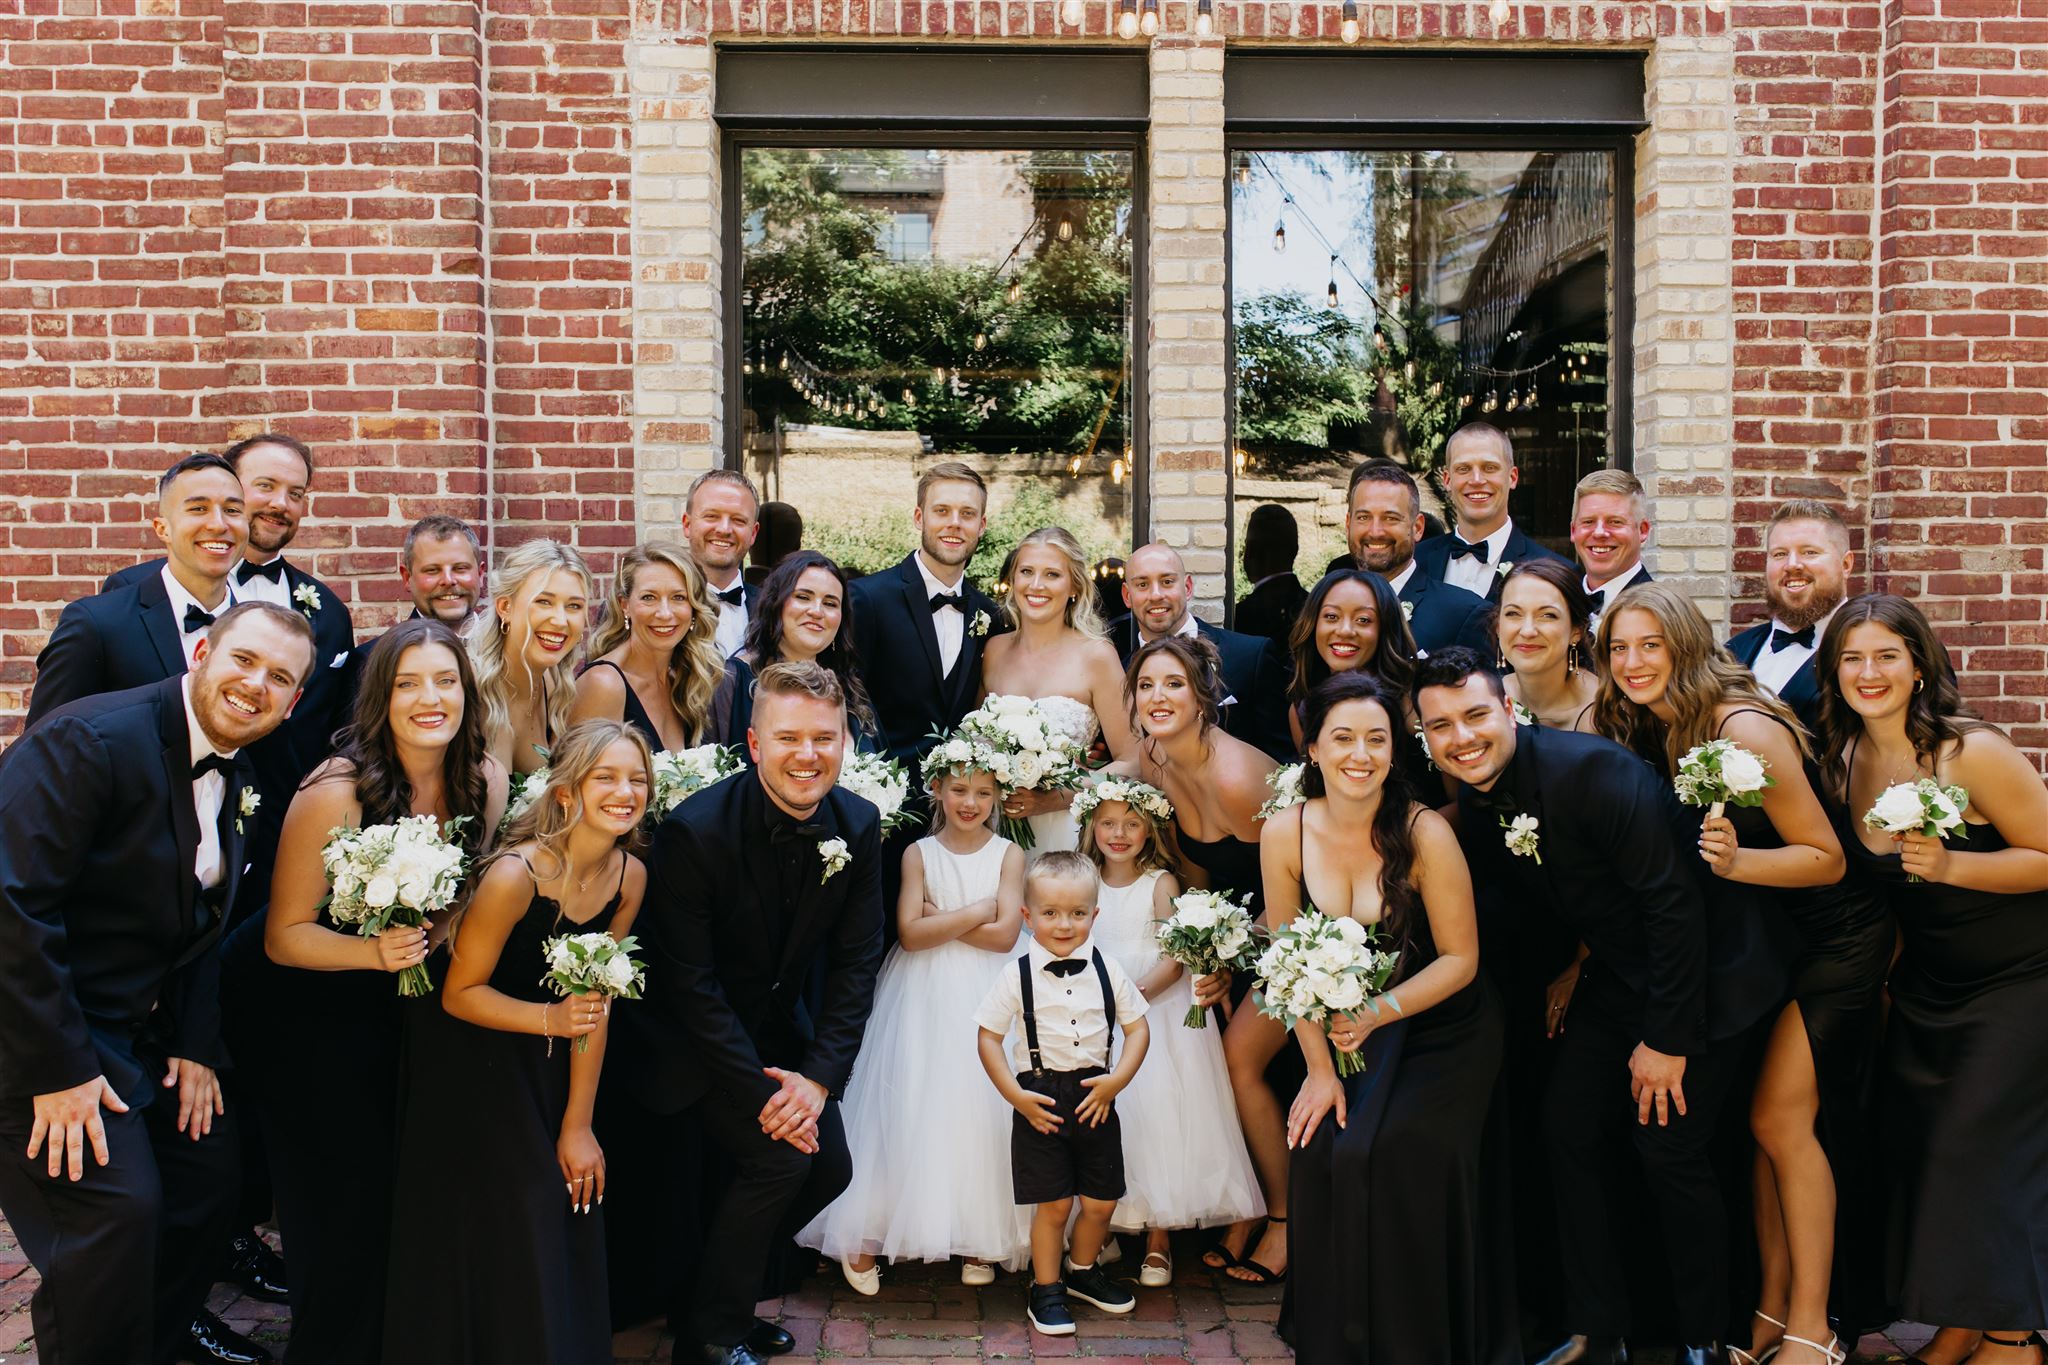 A cute photo of the bride and groom's loved ones on their wedding day